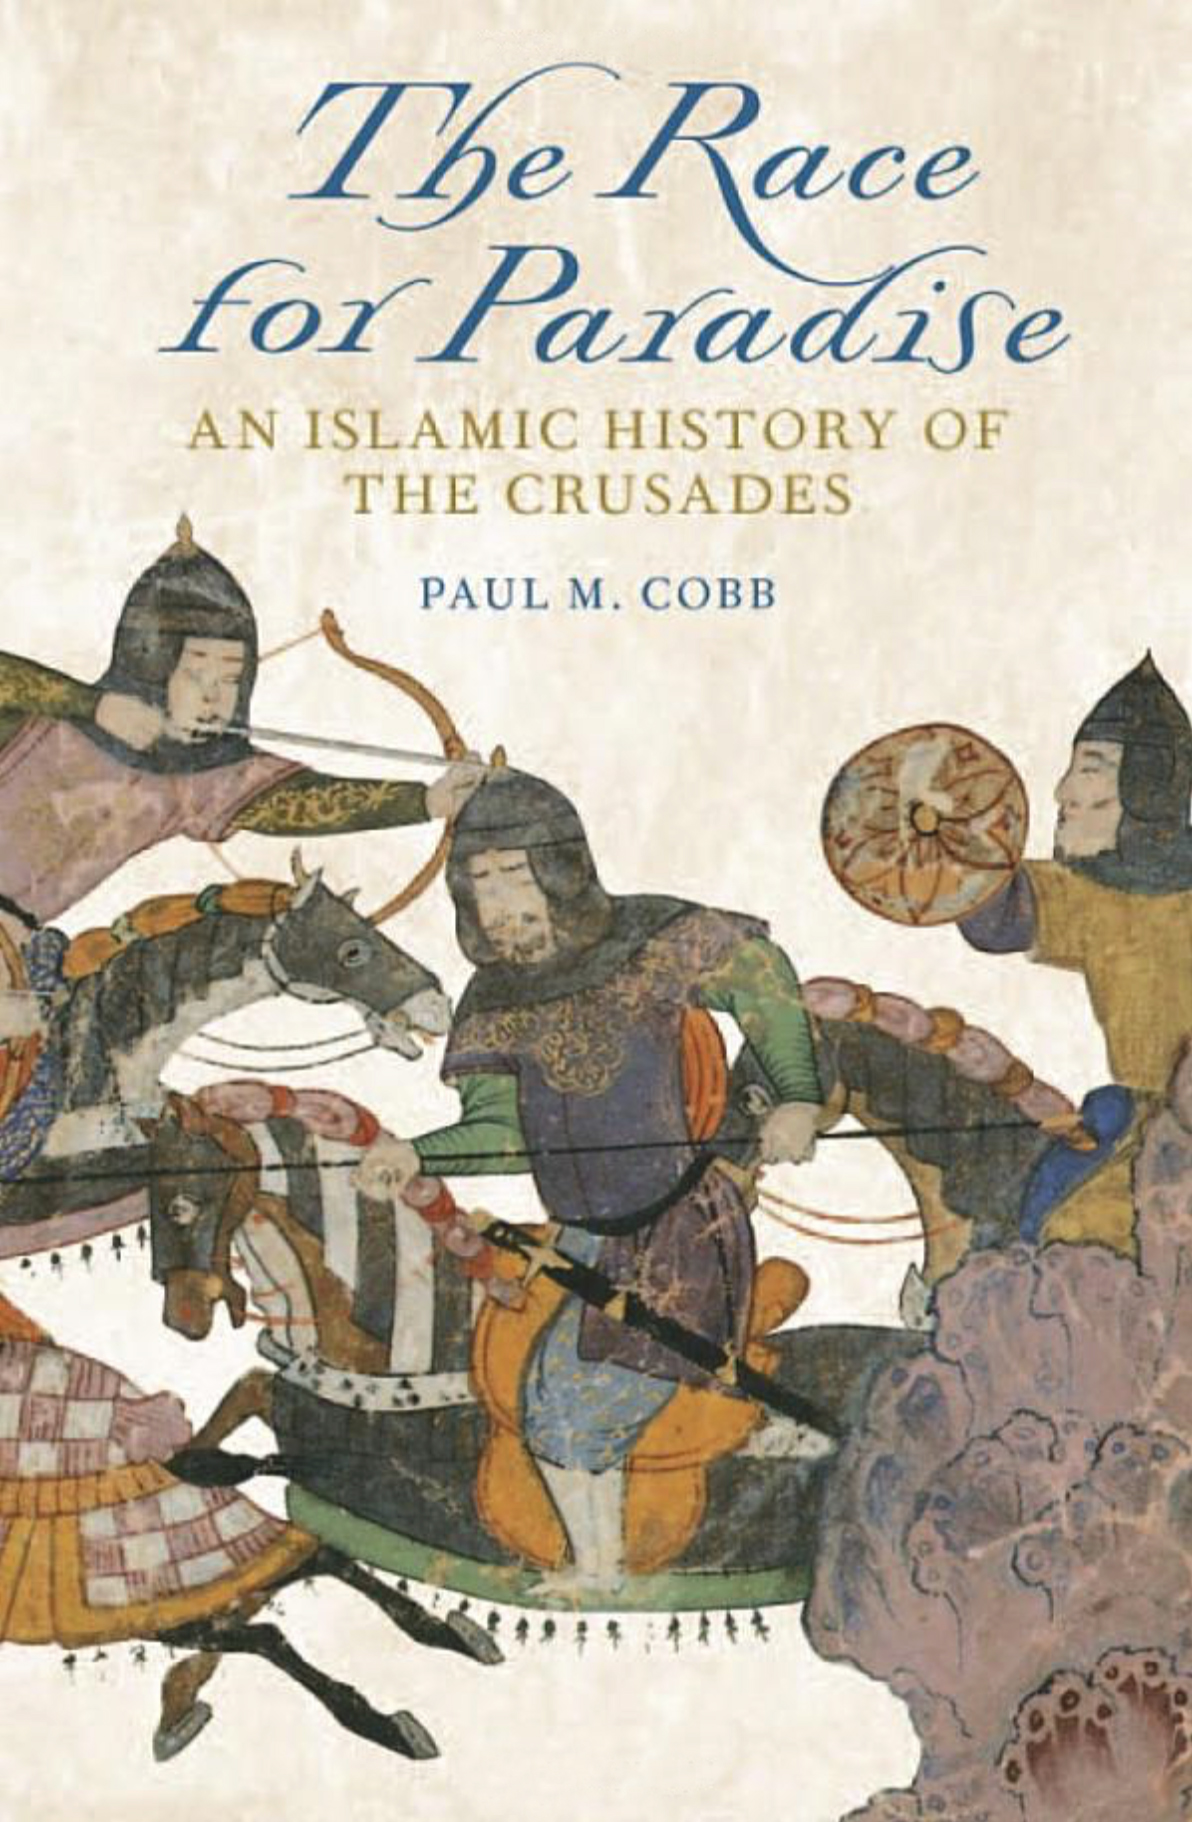 The Race for Paradise: An Islamic History of the Crusades